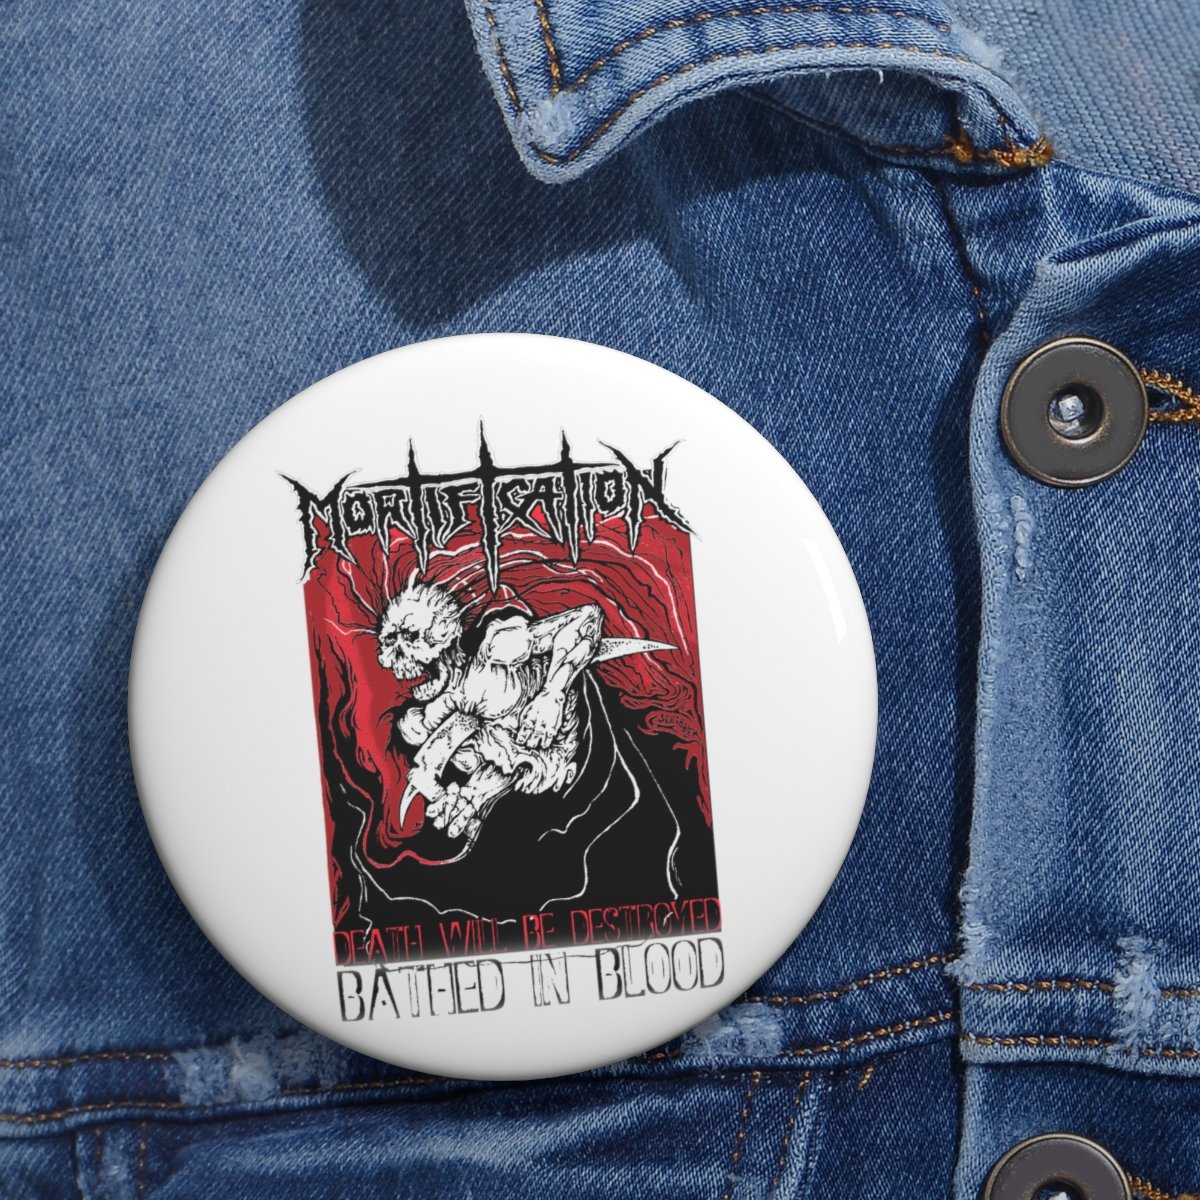 Mortification – Bathed In Blood (White) Pin Buttons